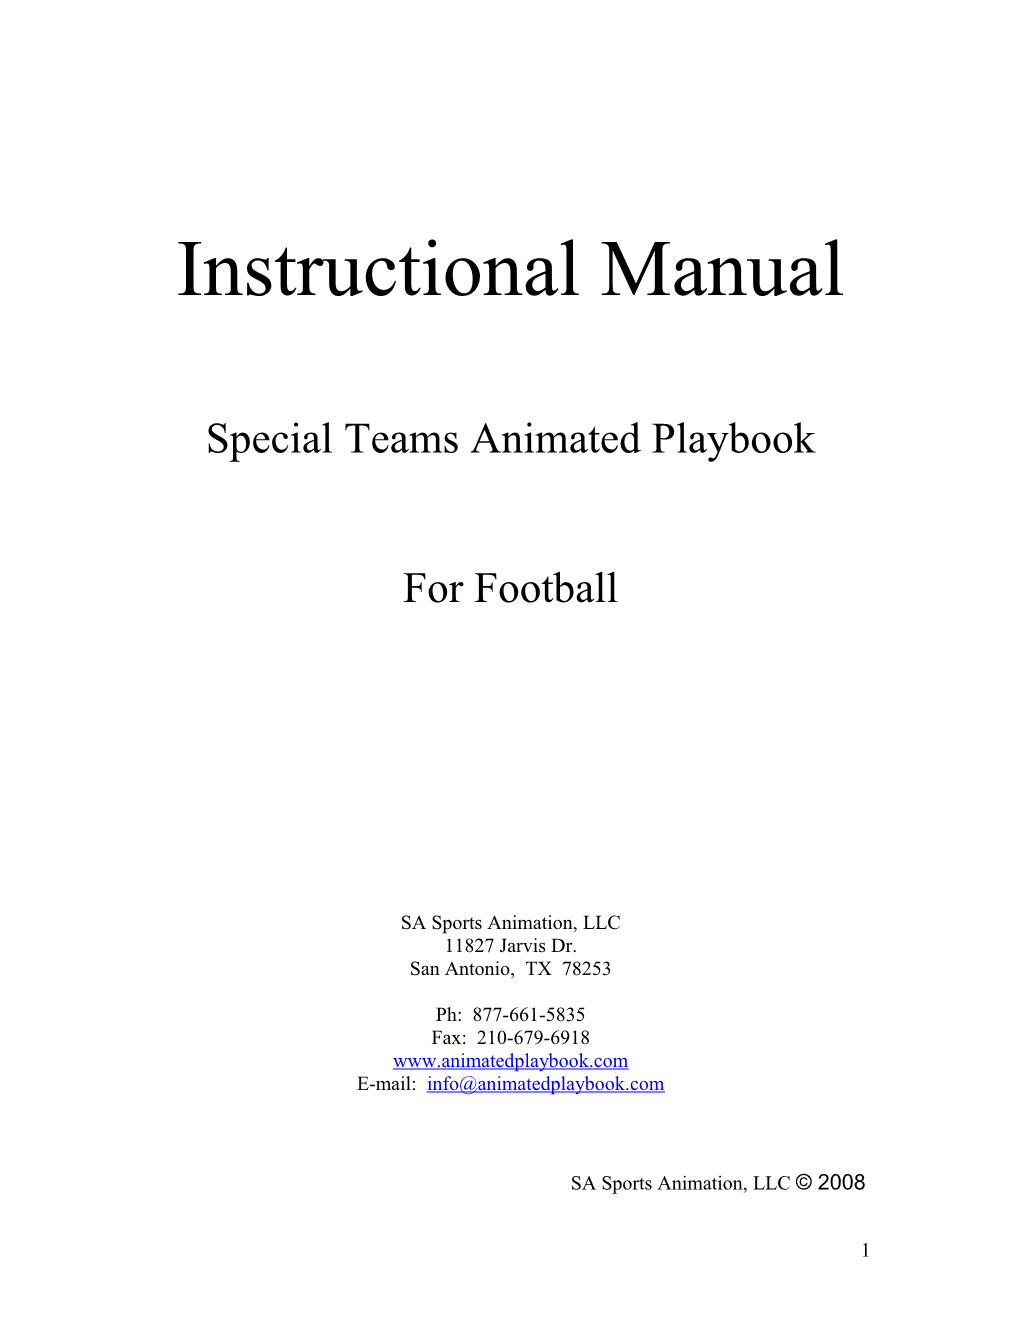 Special Teams Animated Playbook